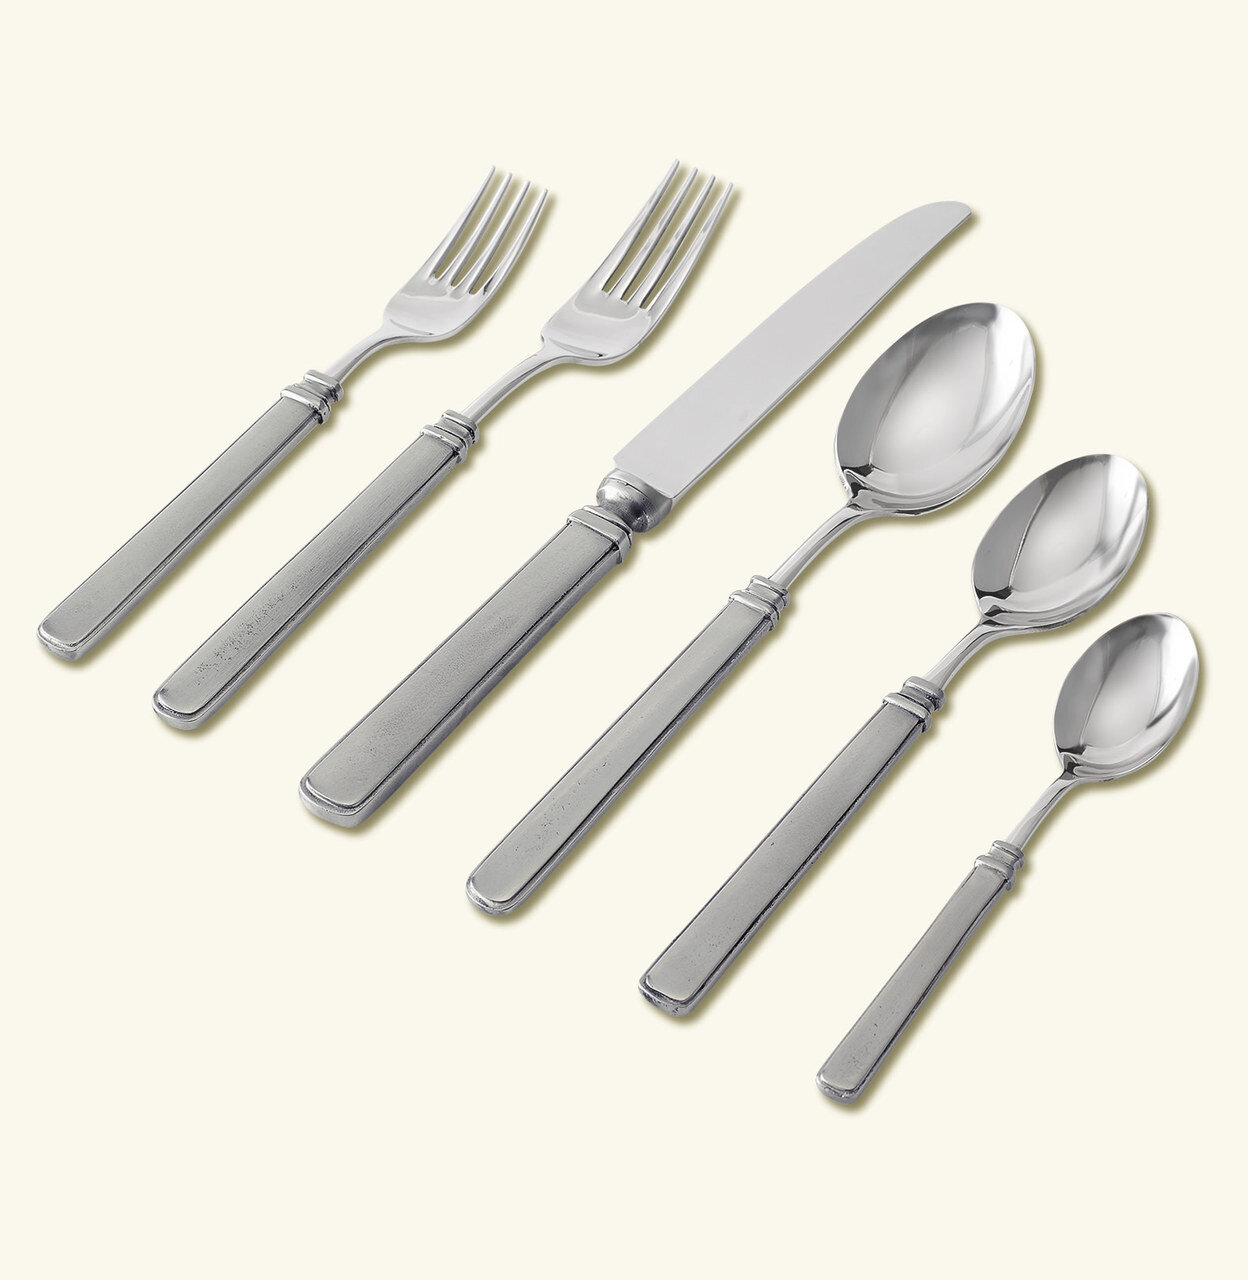 Match Pewter Gabriella 5 Piece Place Setting With Forged Knife